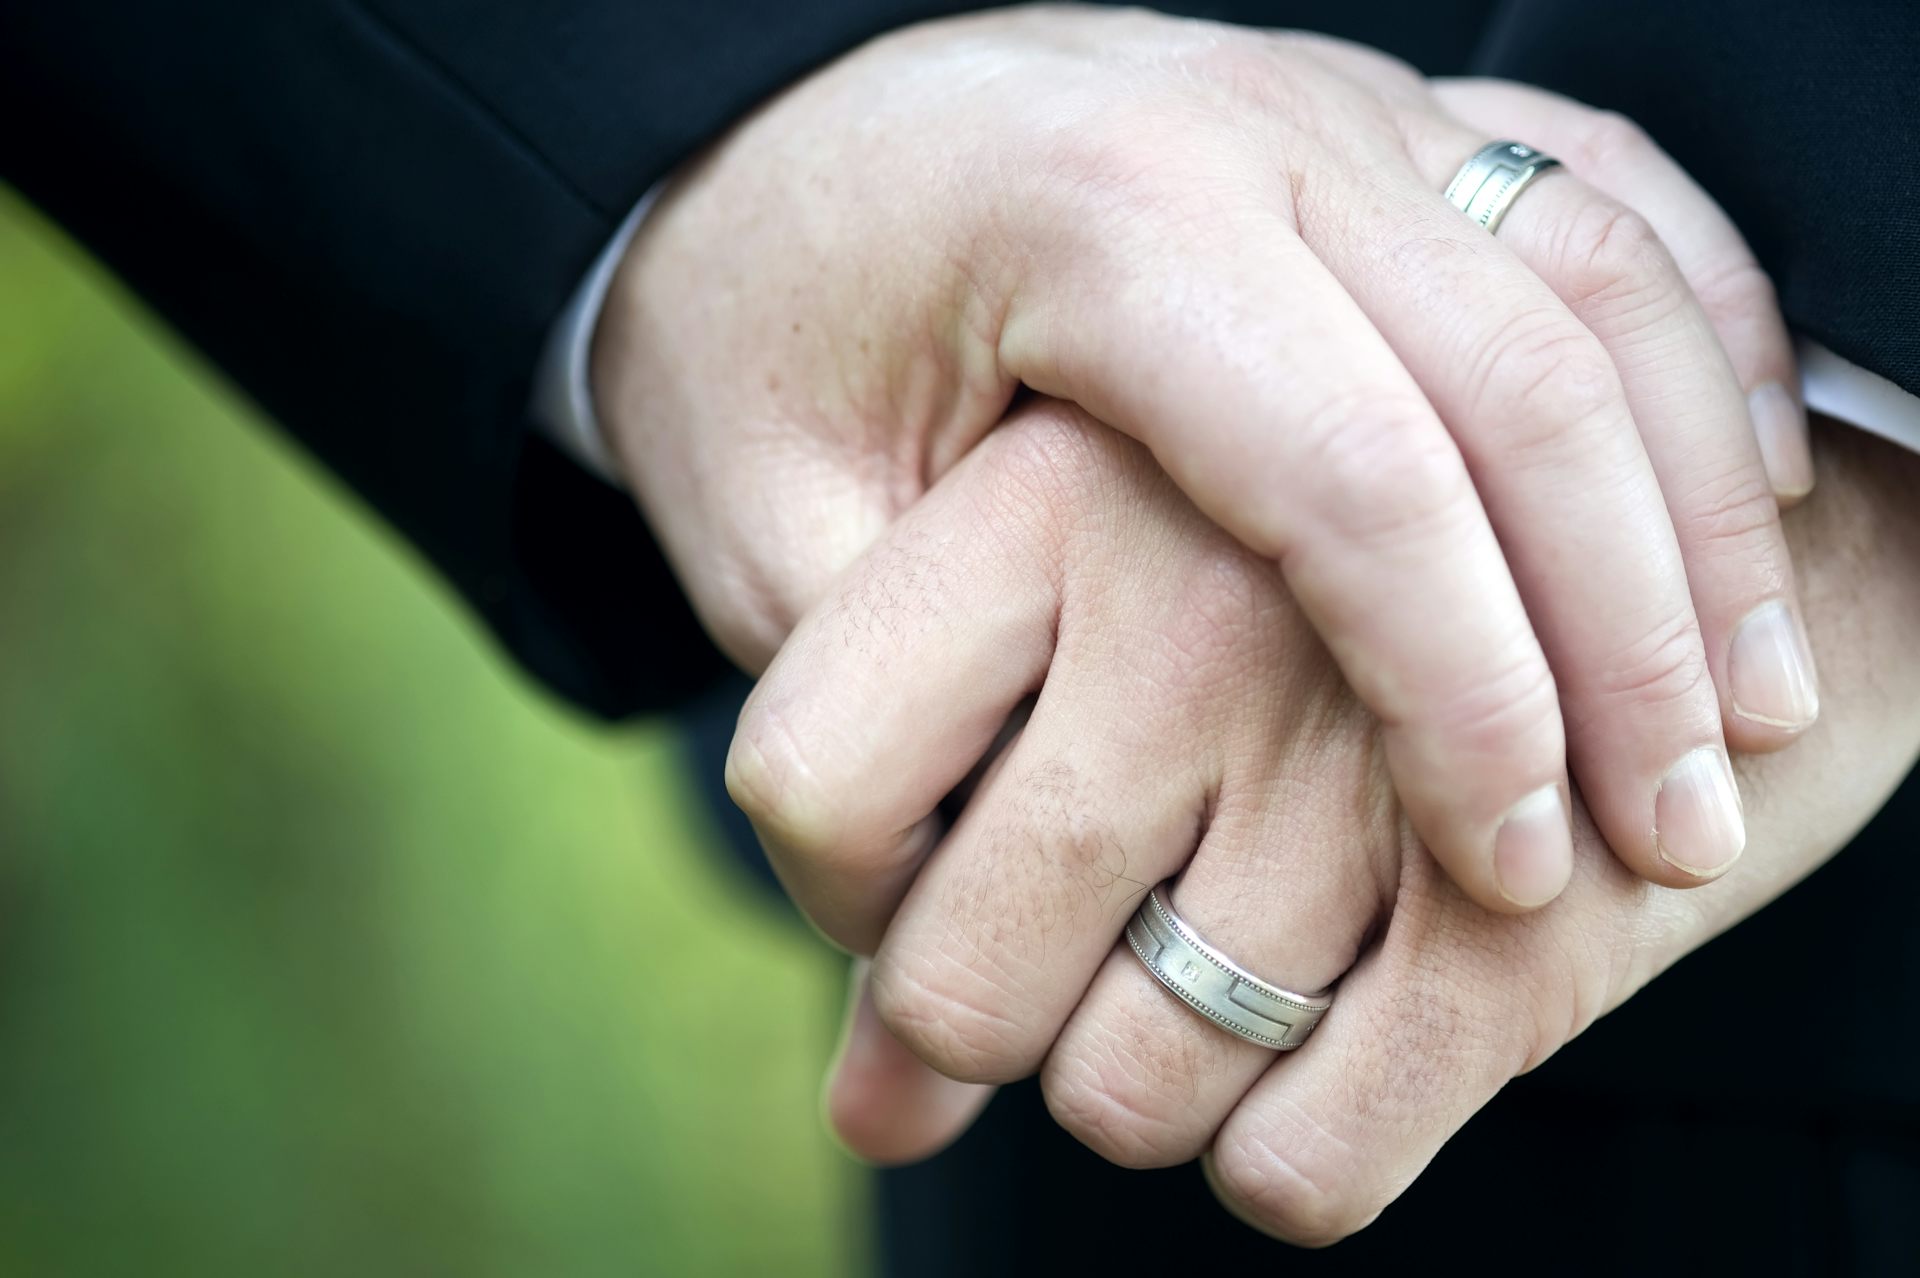 Marriage could be good for your health